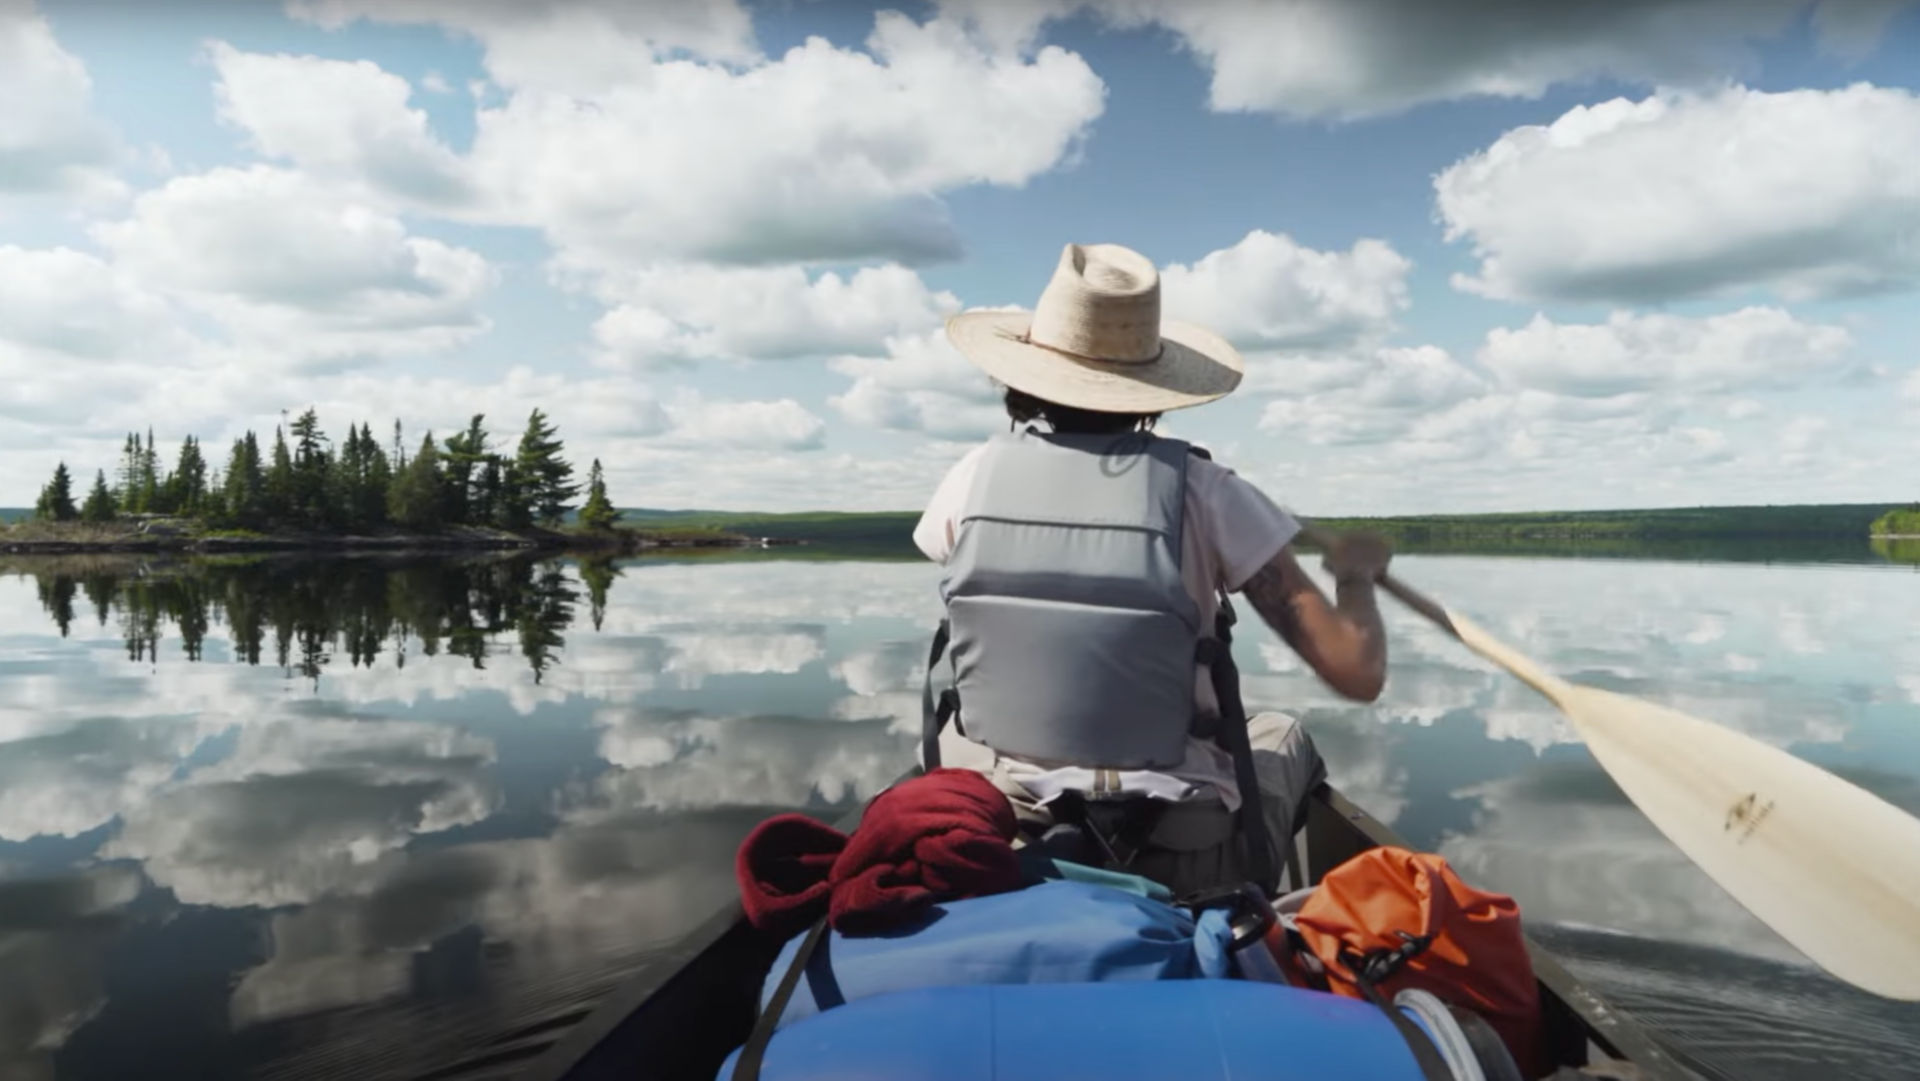 Looking at a person from behind while they paddle a canoe on a lake